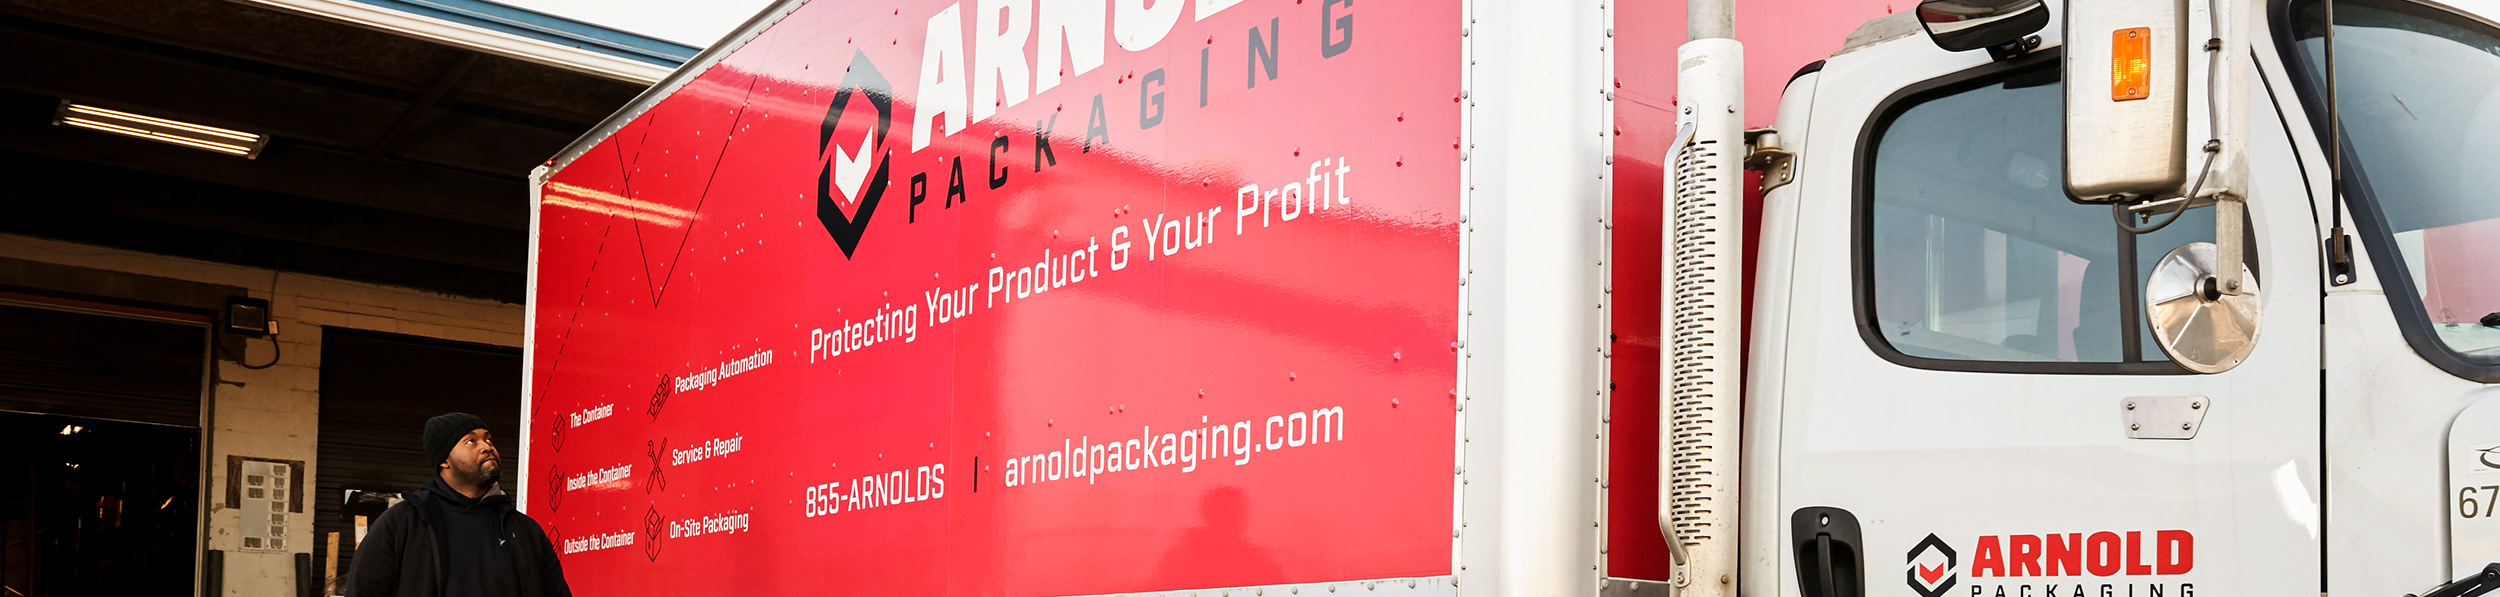 Arnold Packaging - About Us (New)